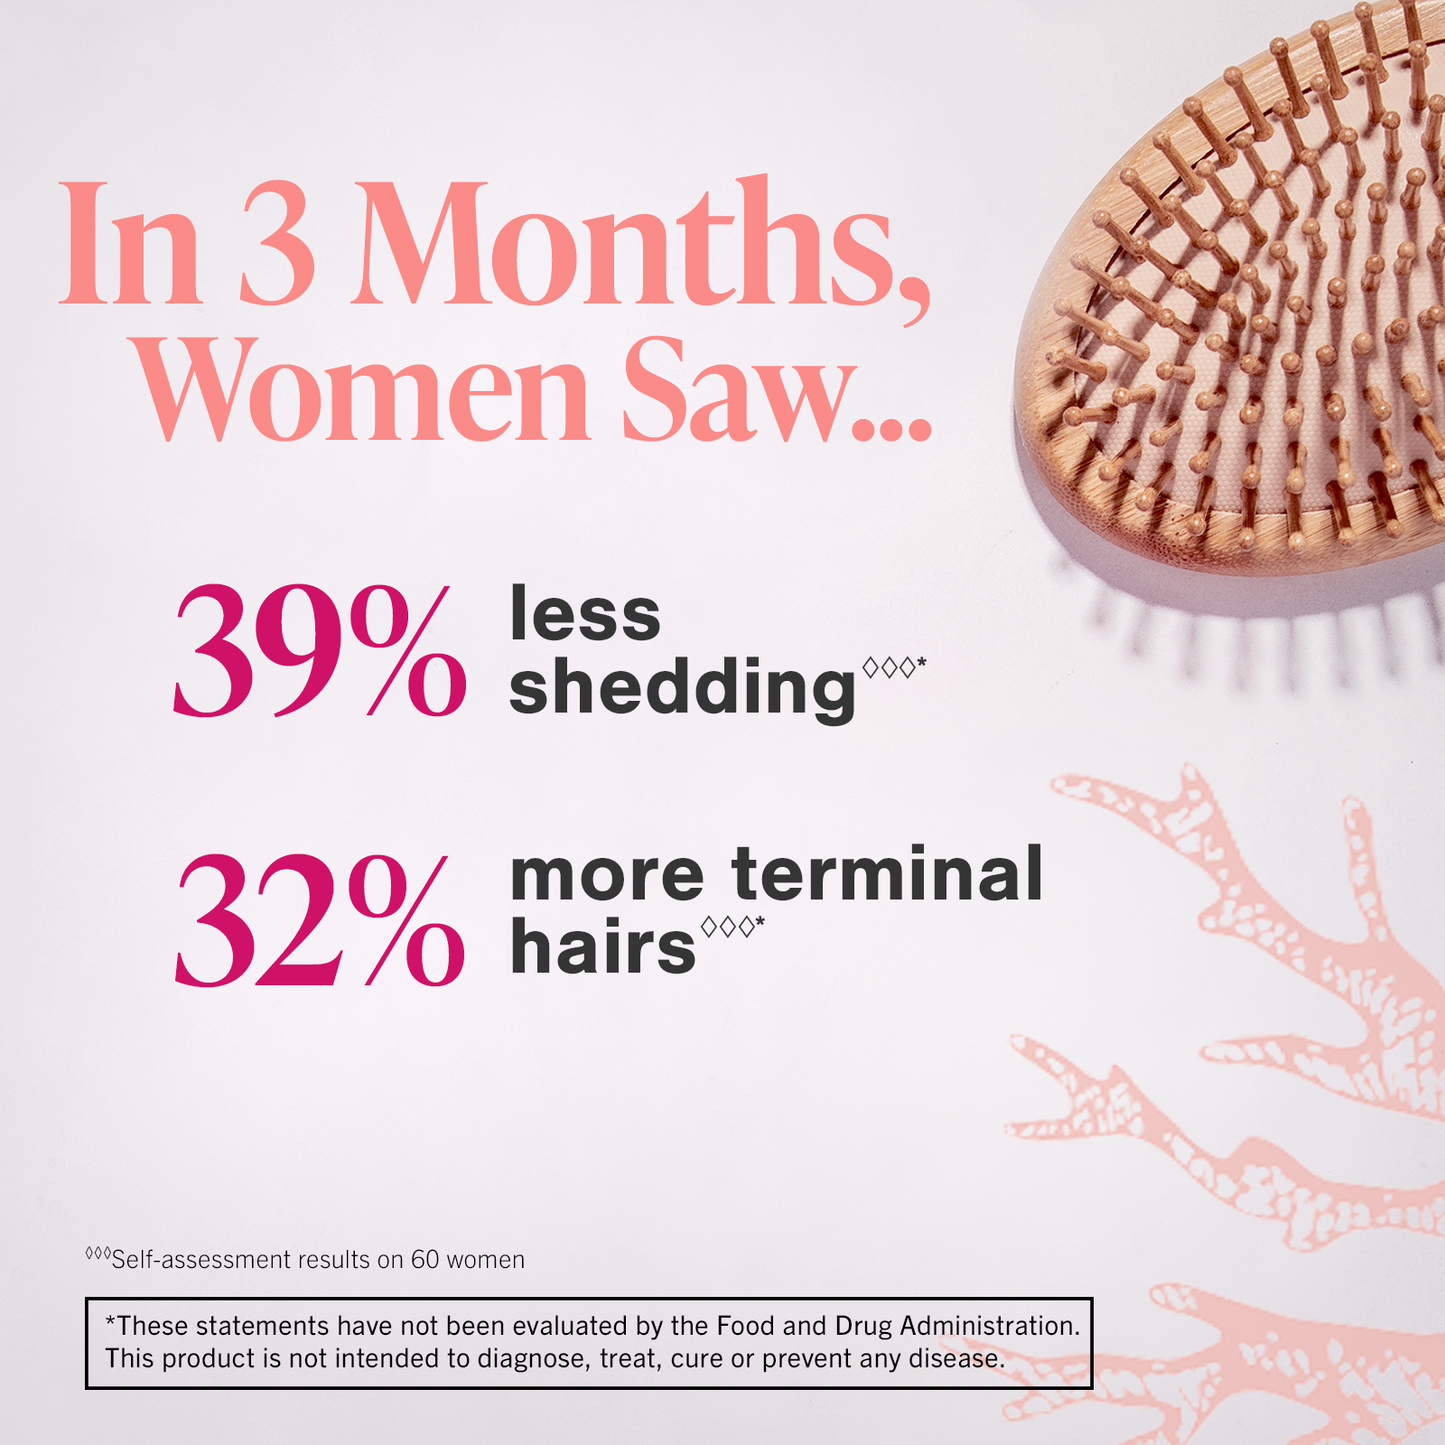 in three months woman saw thirty nine percent less shedding, and thirty two percent more terminal hairs